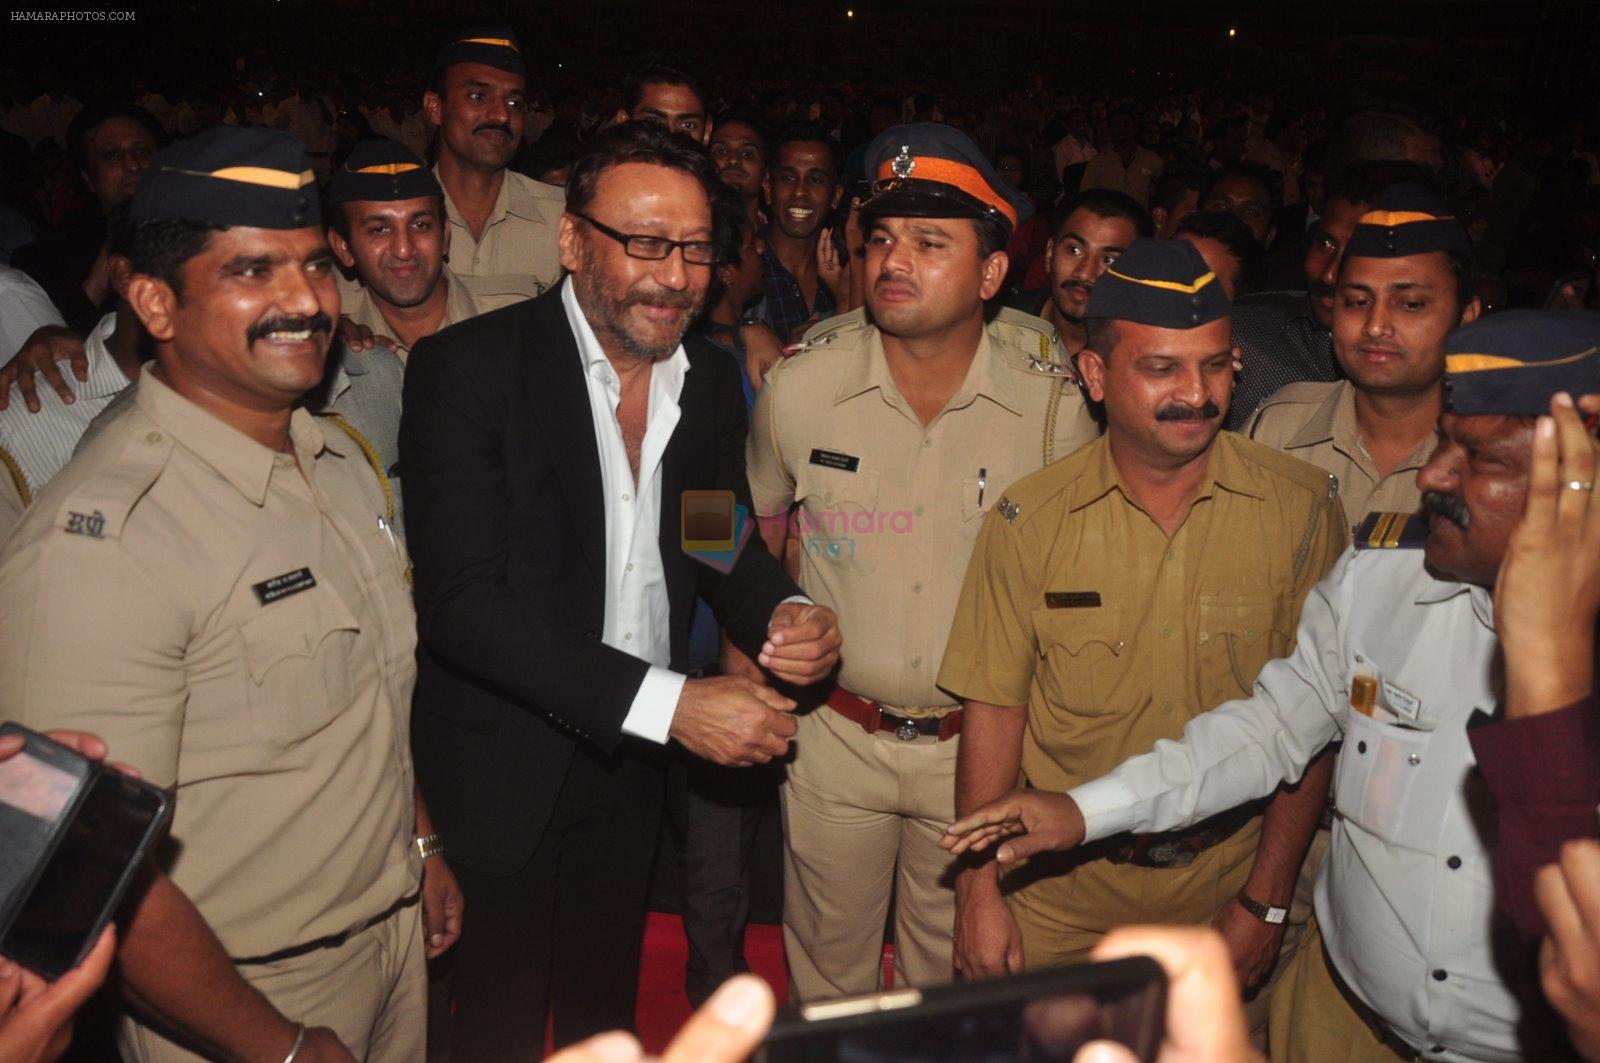 Jackie Shroff at Police show Umang in Andheri Sports Complex, Mumbai on 10th Jan 2015